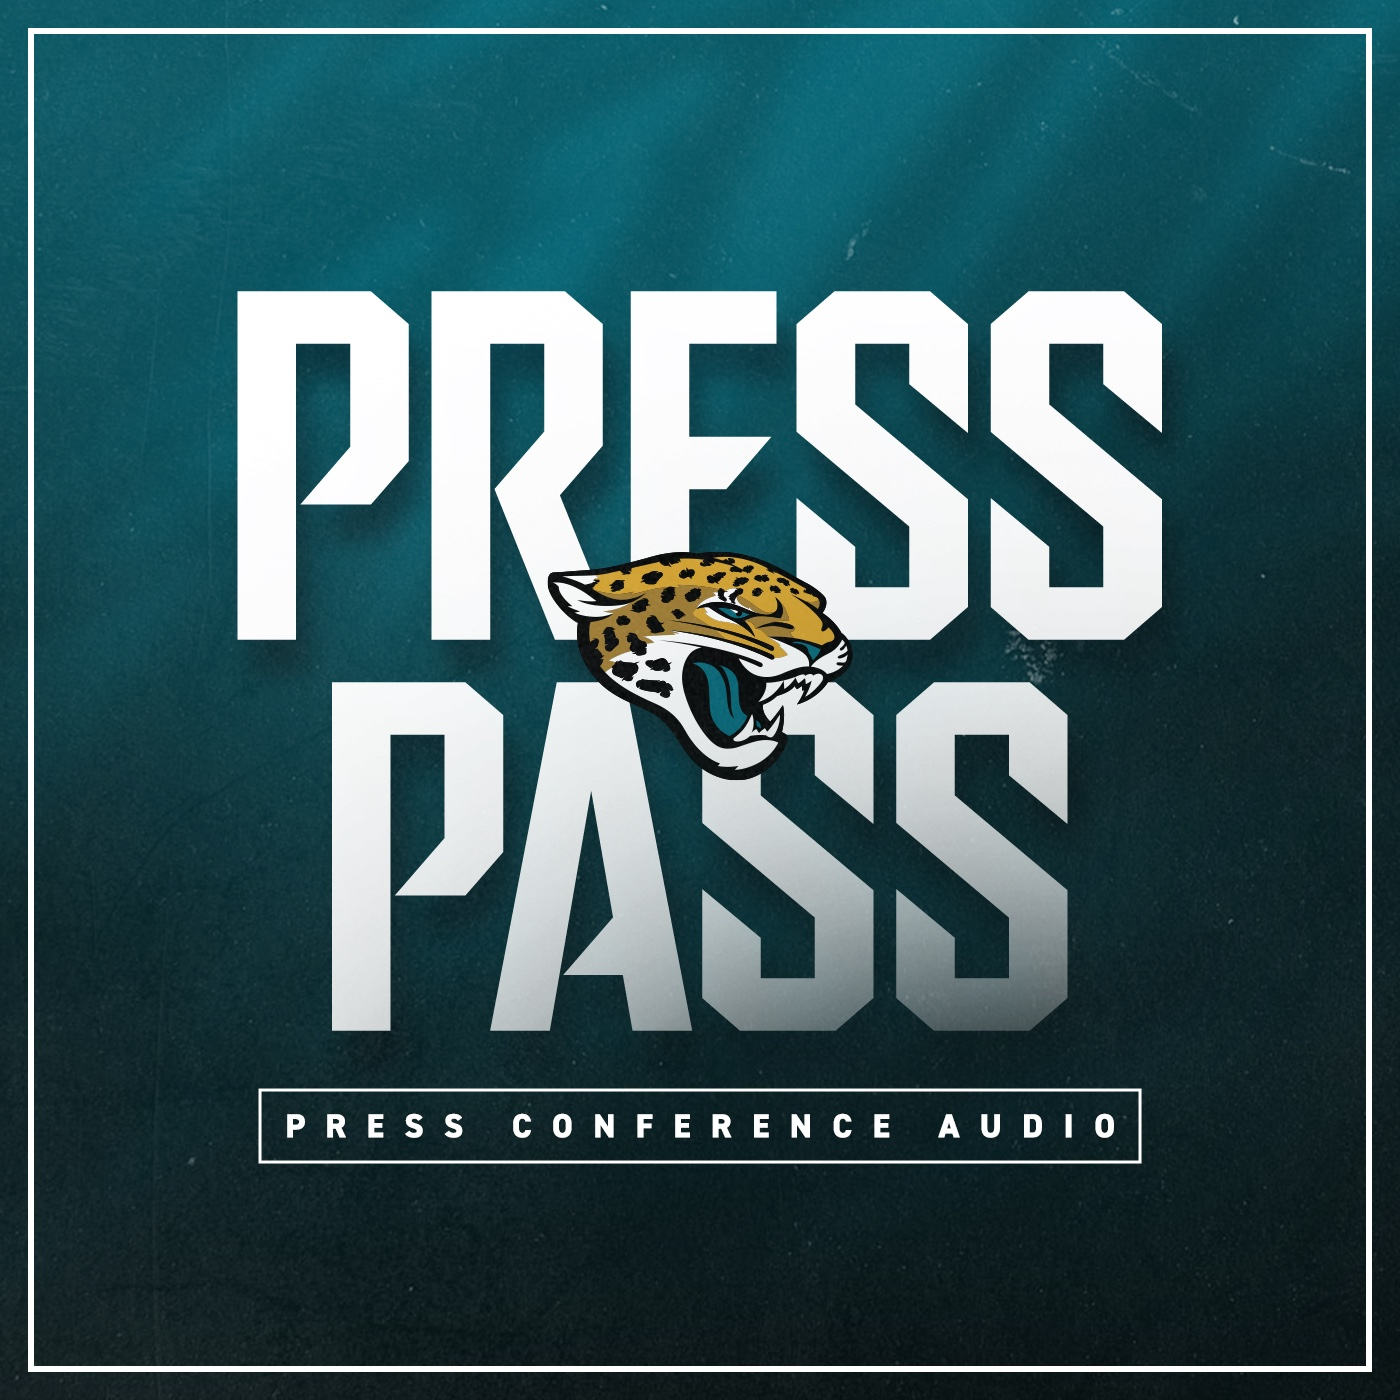 Press Pass | Press Taylor on Etienne status, evaluation of the playbook